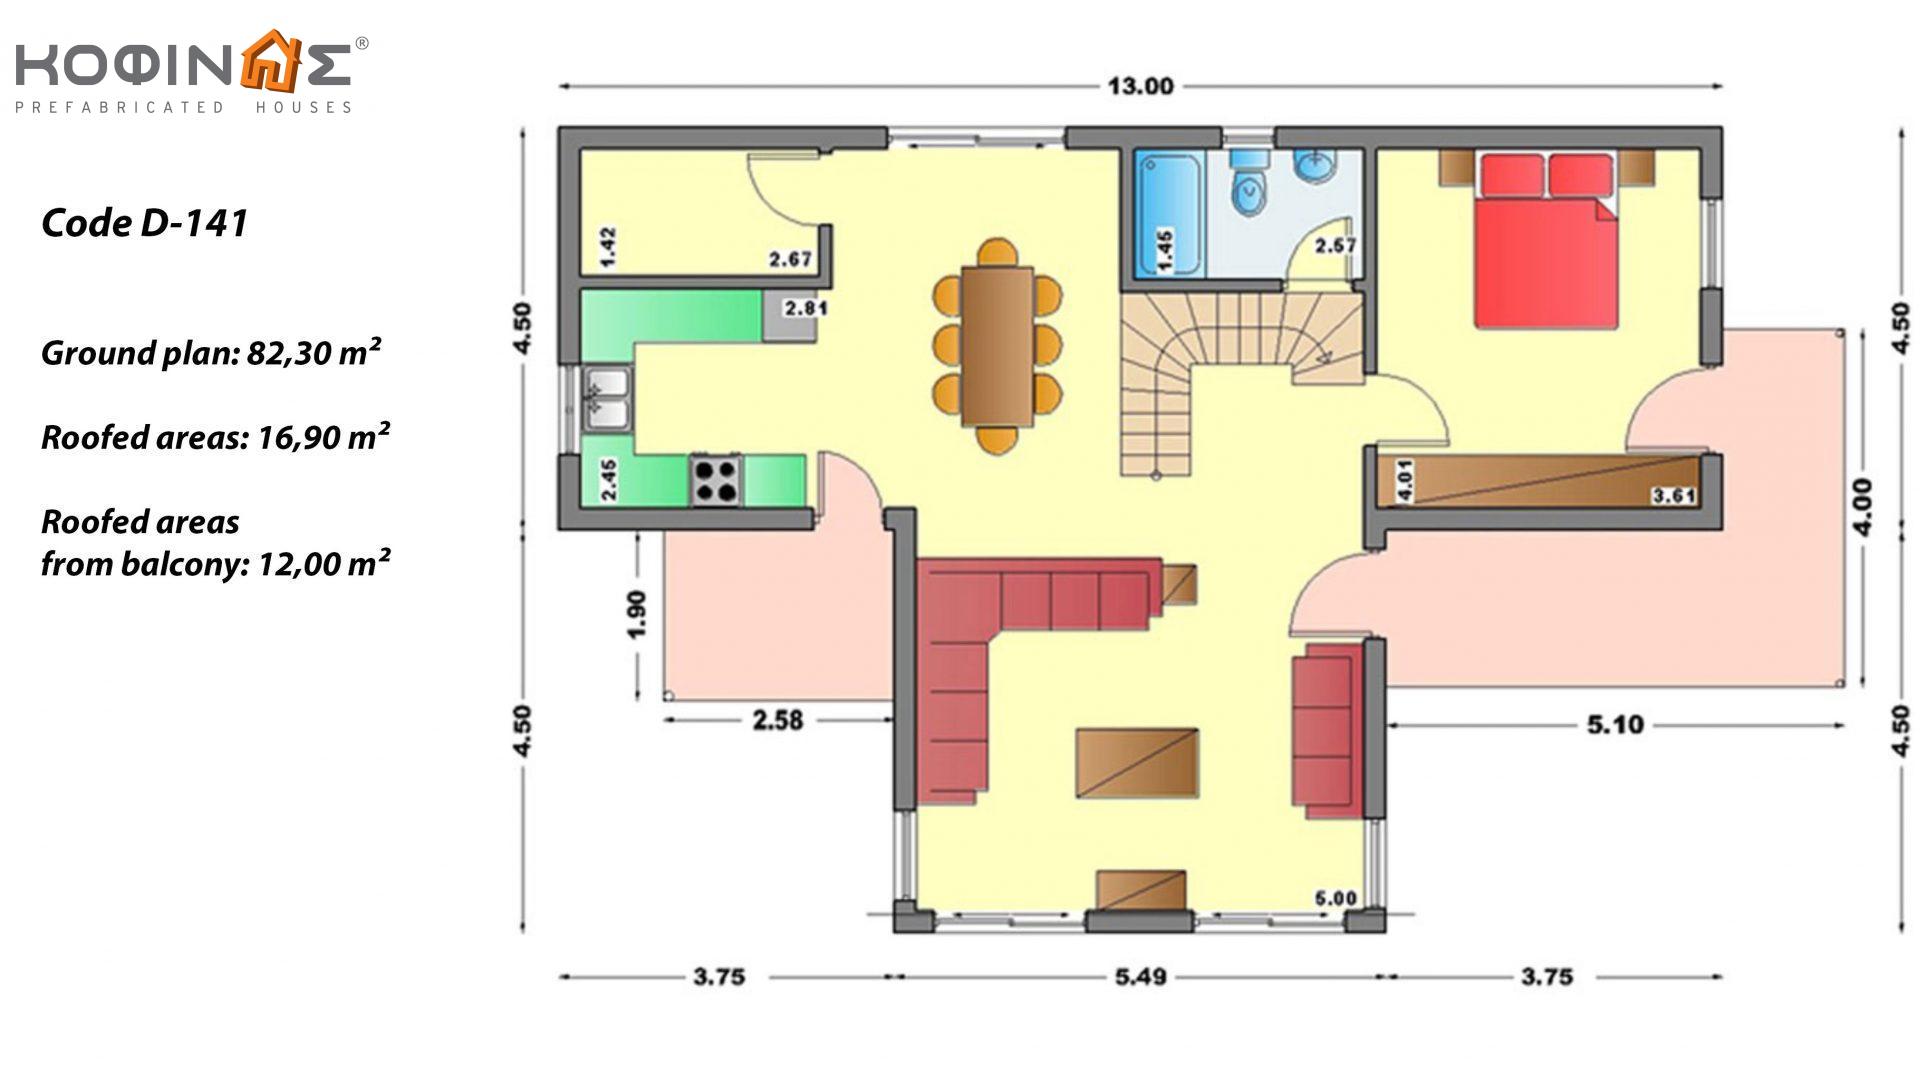 2-story house D-141, total surface of 141,70 m²,covered roofed areas 28.90 m²,balconies 12.00 m²